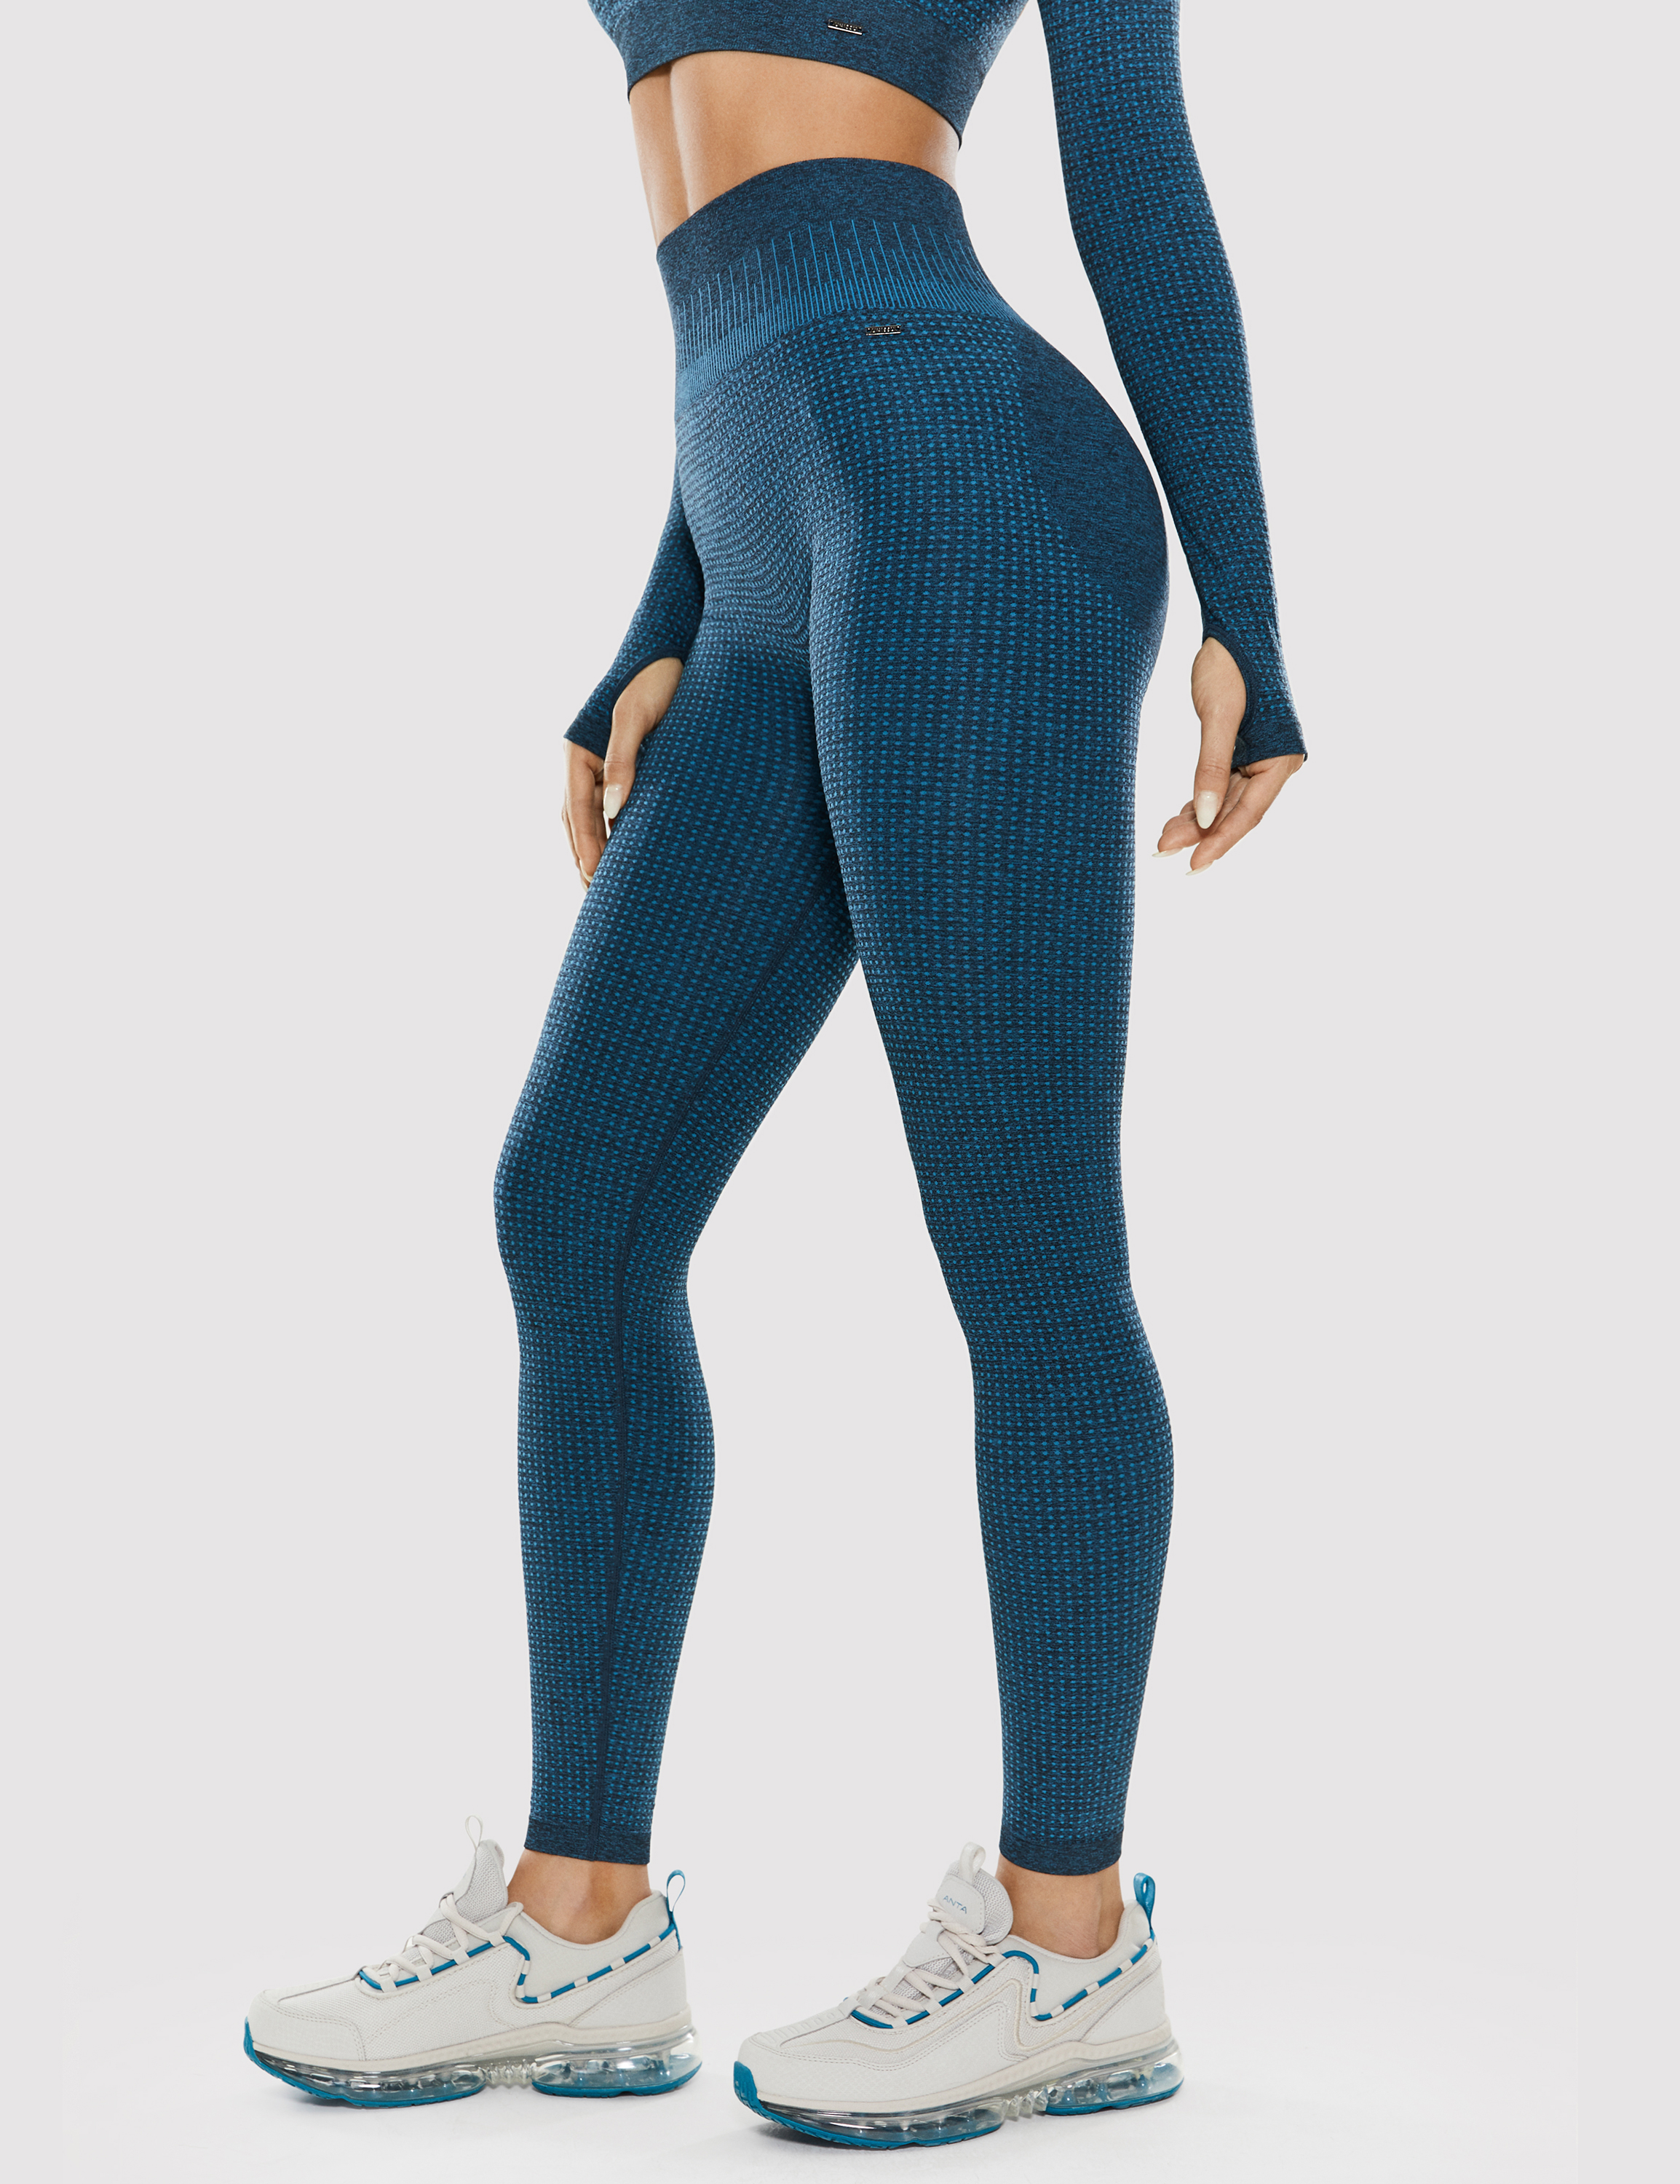 Women's High Waisted Workout Seamless Leggings Gym Tummy Control Pants